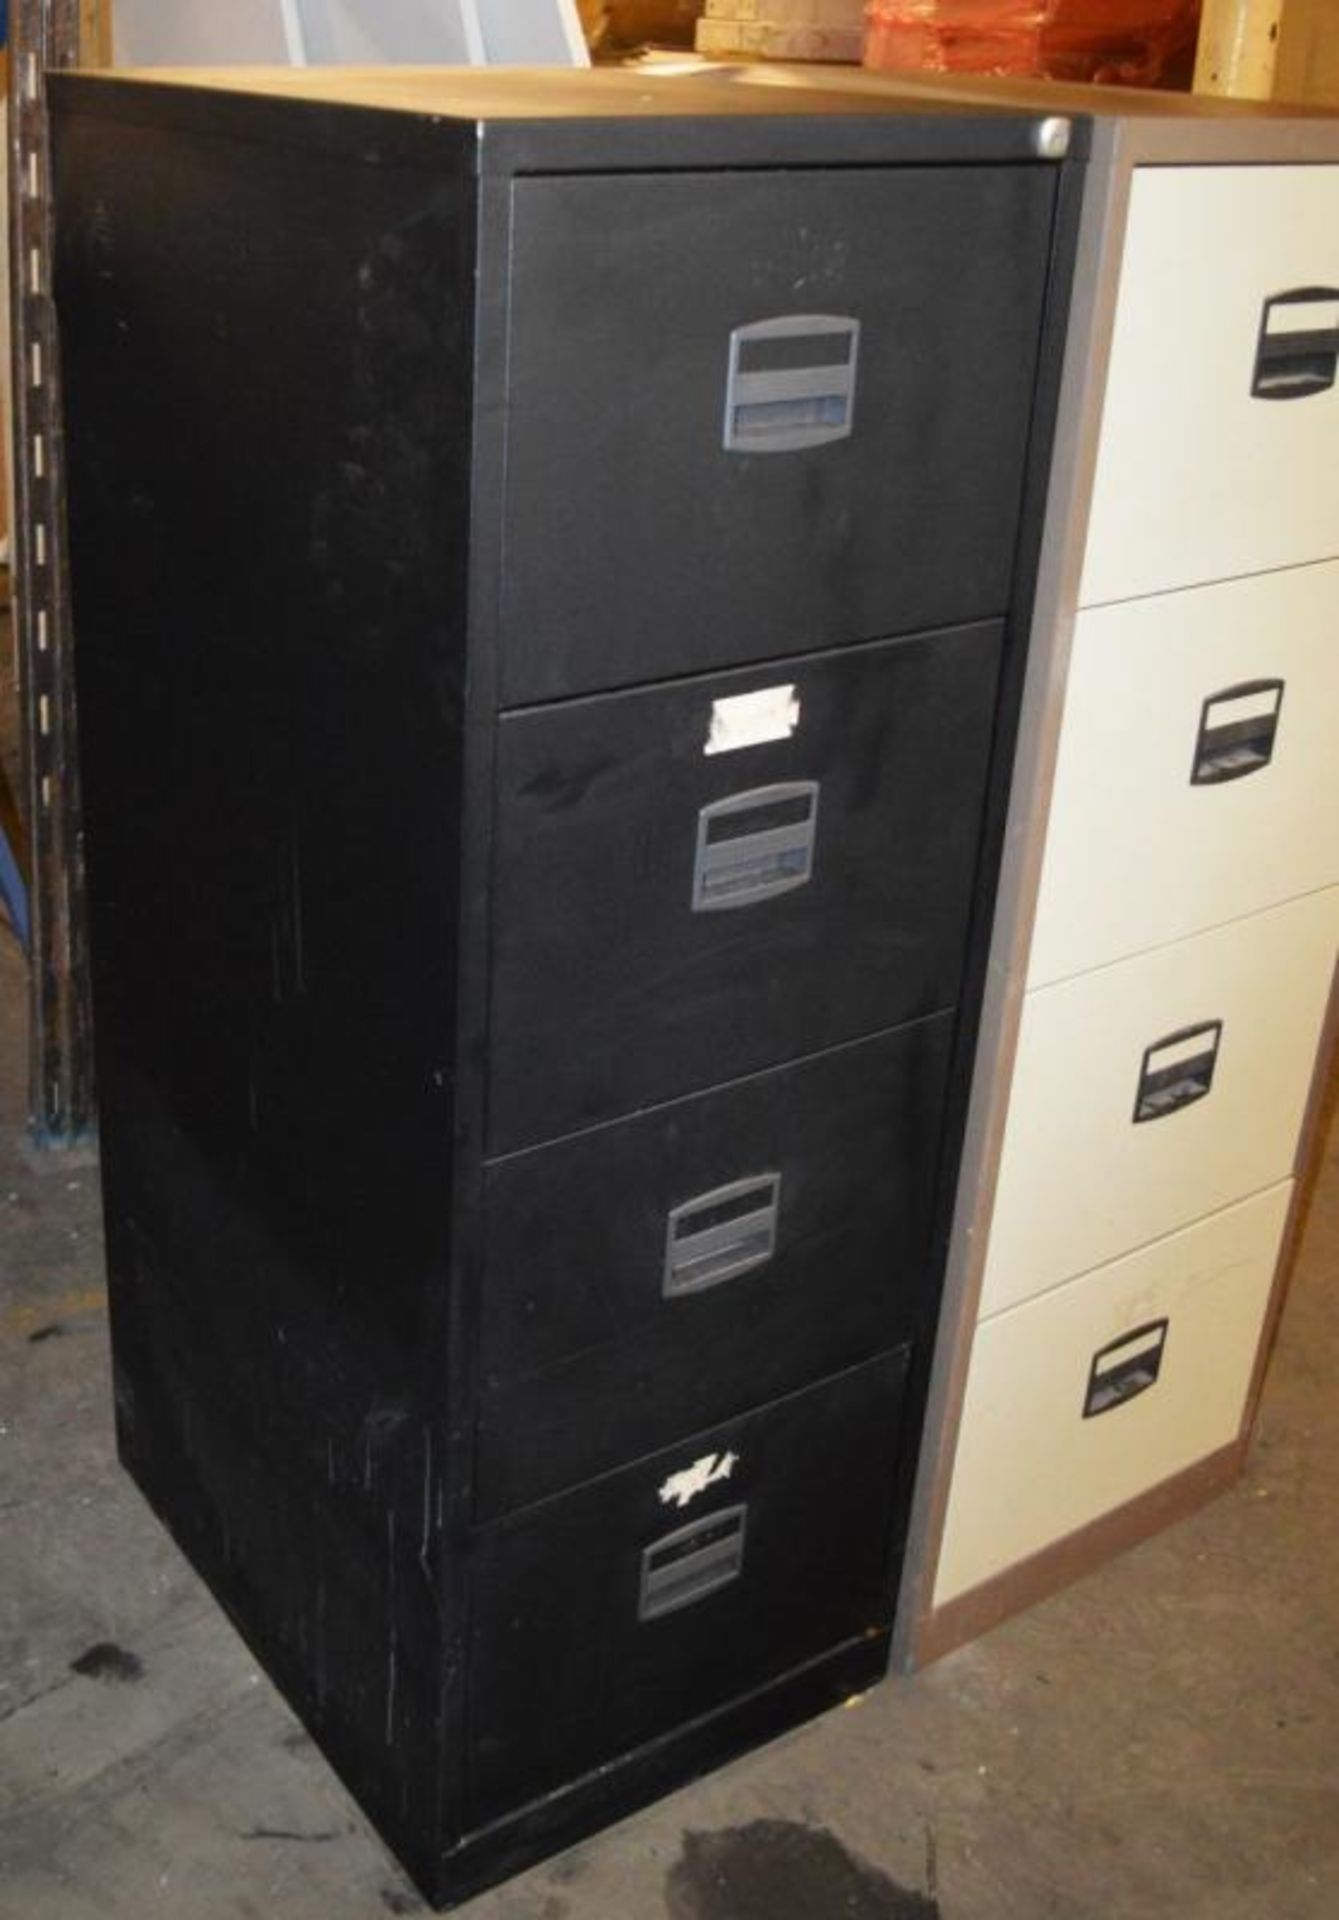 2 x Metal Filing Cabinets - Dimensions: H132 x W47 x D63cm - Used, Open, No Keys - Low Start, No Res - Image 4 of 5